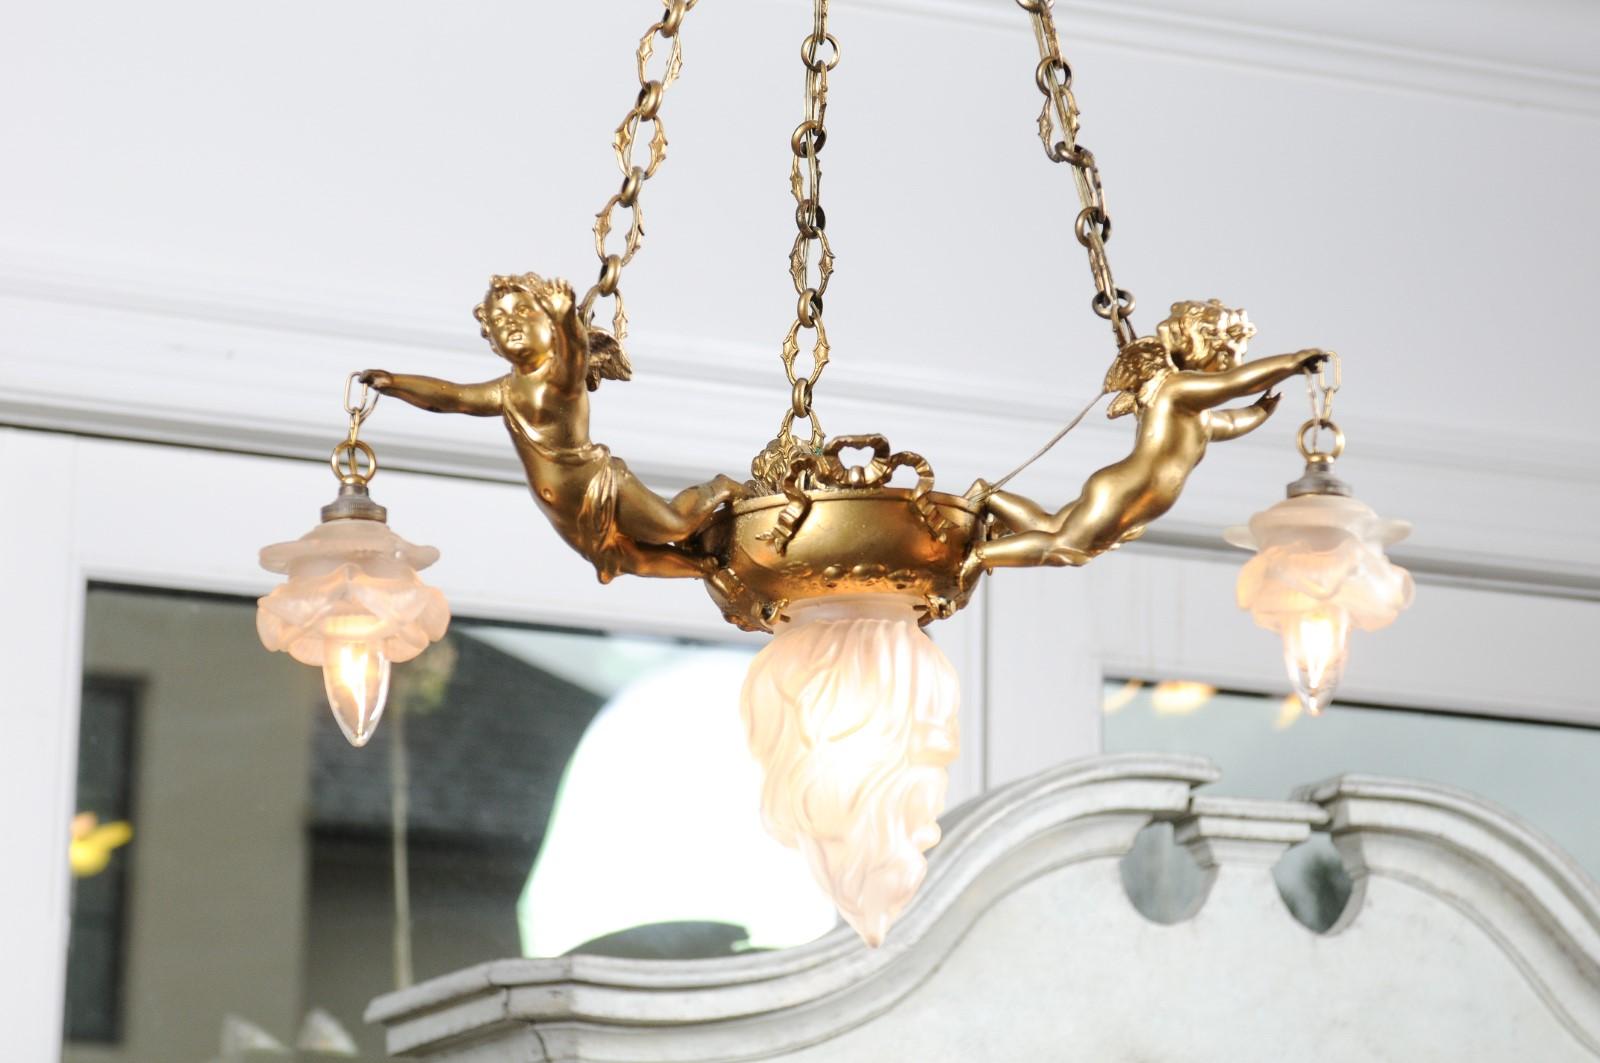 French 19th Century Gilt Metal Chandelier with Three Cherubs Holding the Lights For Sale 3